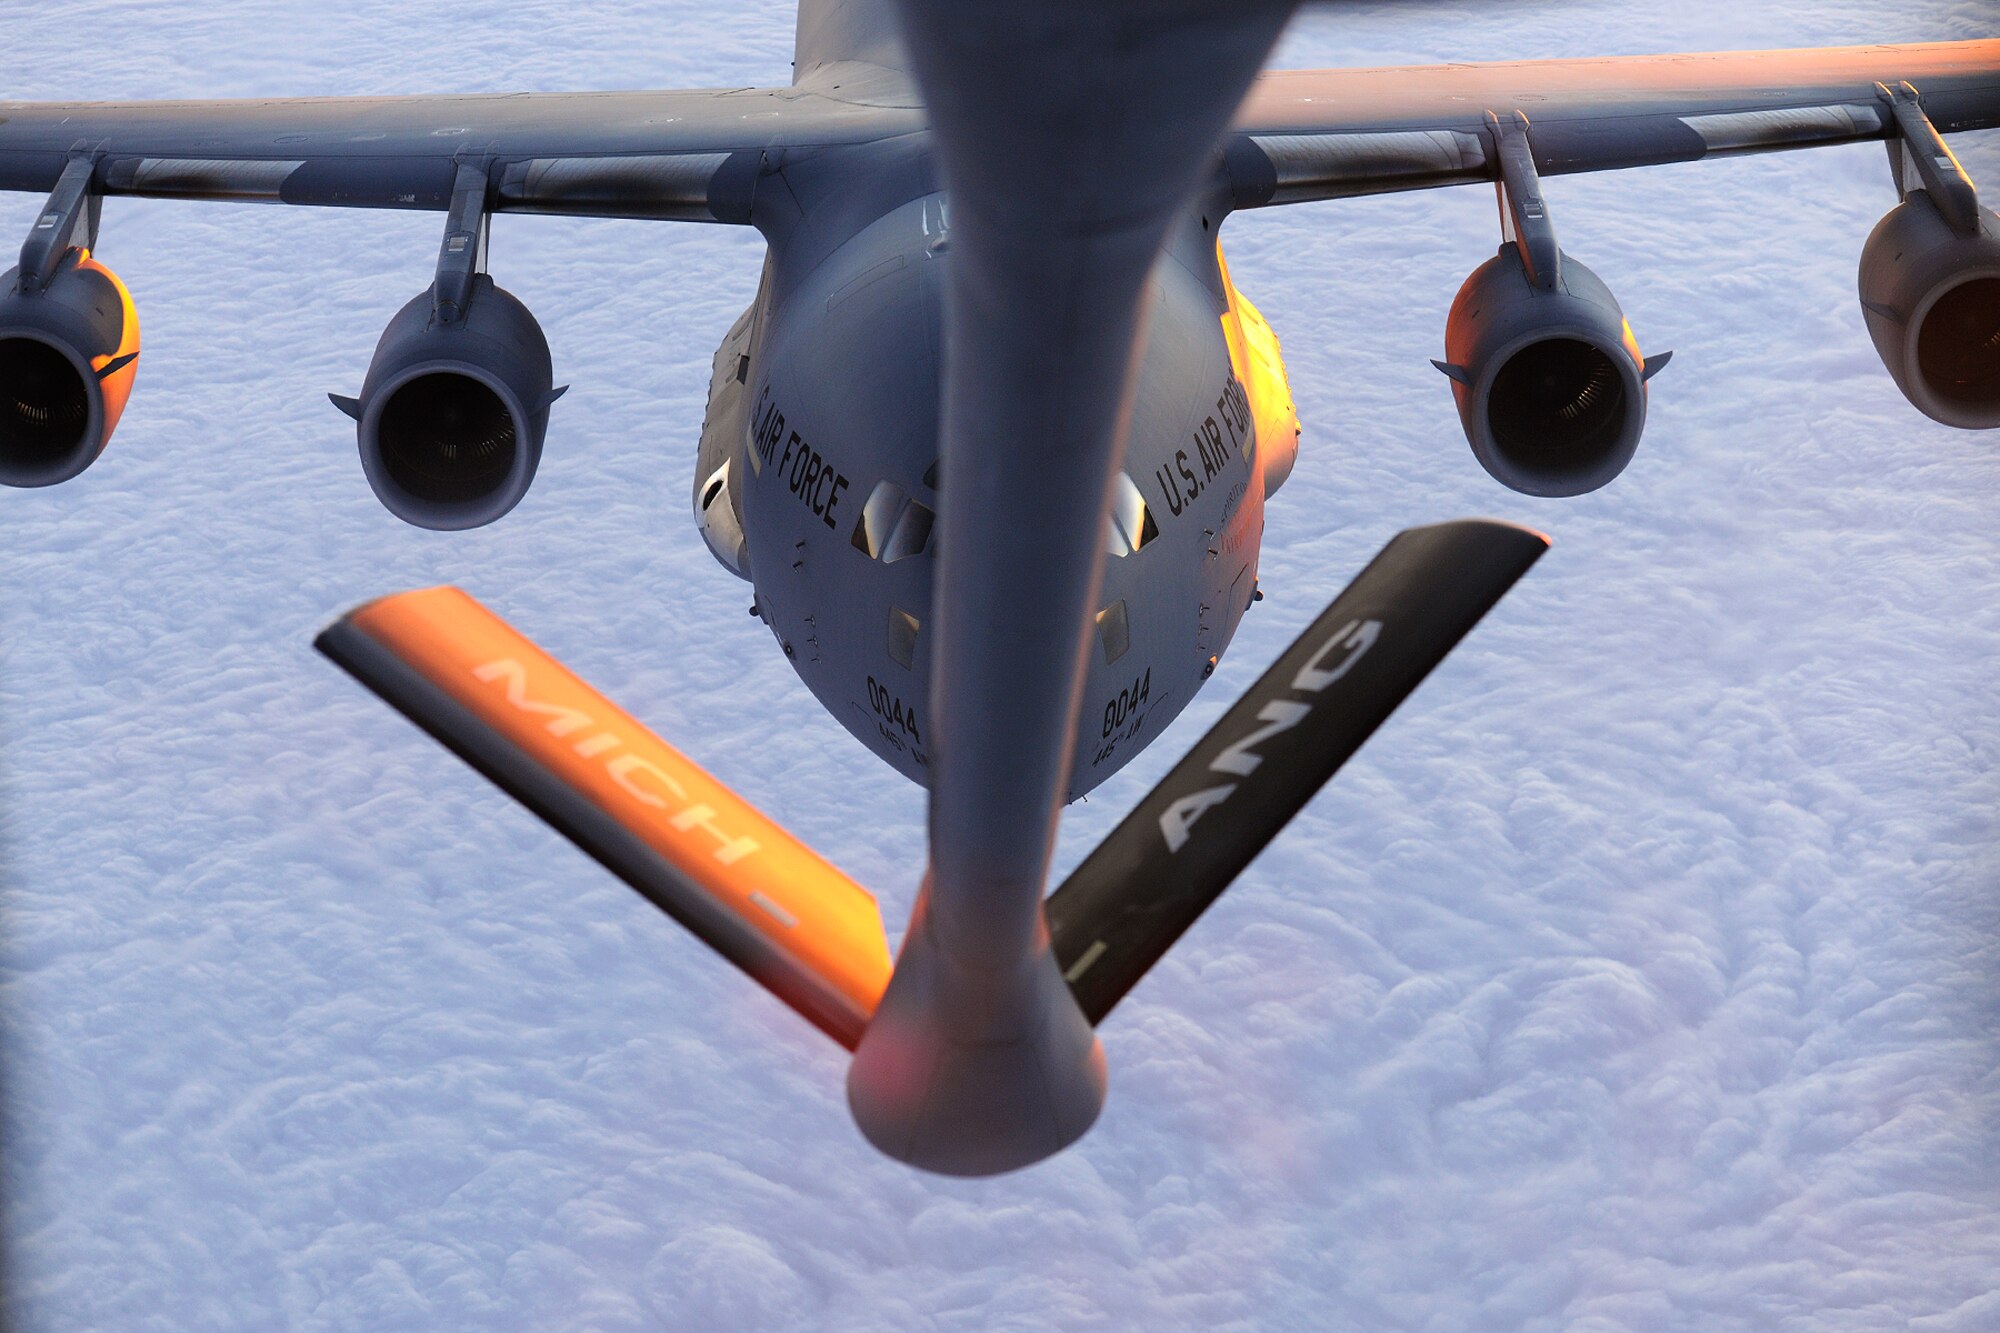 150825-Z-EZ686-067 -- A KC-135 Stratotanker from the 171st Air Refueling Squadron, Selfridge Air National Guard Base, Mich., refuels a C-17 Globemaster III from the 445th Airlift Wing during a training mission on Aug. 25, 2015. The KC-135 Stratotanker is operated by the 127th Air Refueling Group, flown by the 171st Air Refueling Squadron and maintained by the 191st Maintenance and 191st Aircraft Maintenance squadrons. (U.S. Air National Guard photo by Master Sgt David Kujawa / Released)